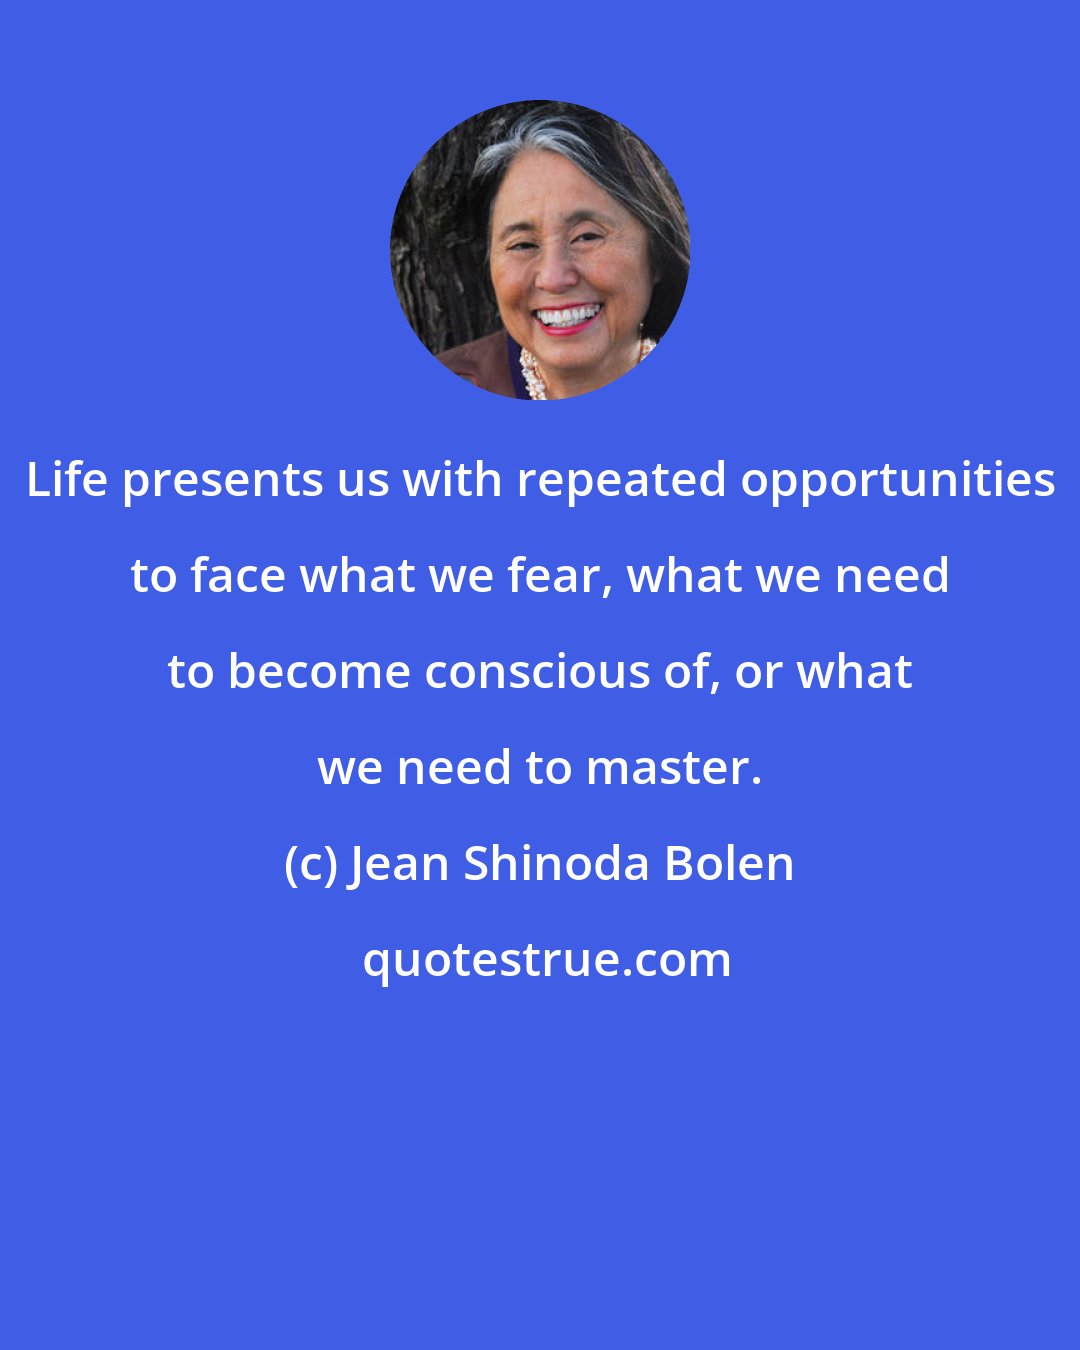 Jean Shinoda Bolen: Life presents us with repeated opportunities to face what we fear, what we need to become conscious of, or what we need to master.